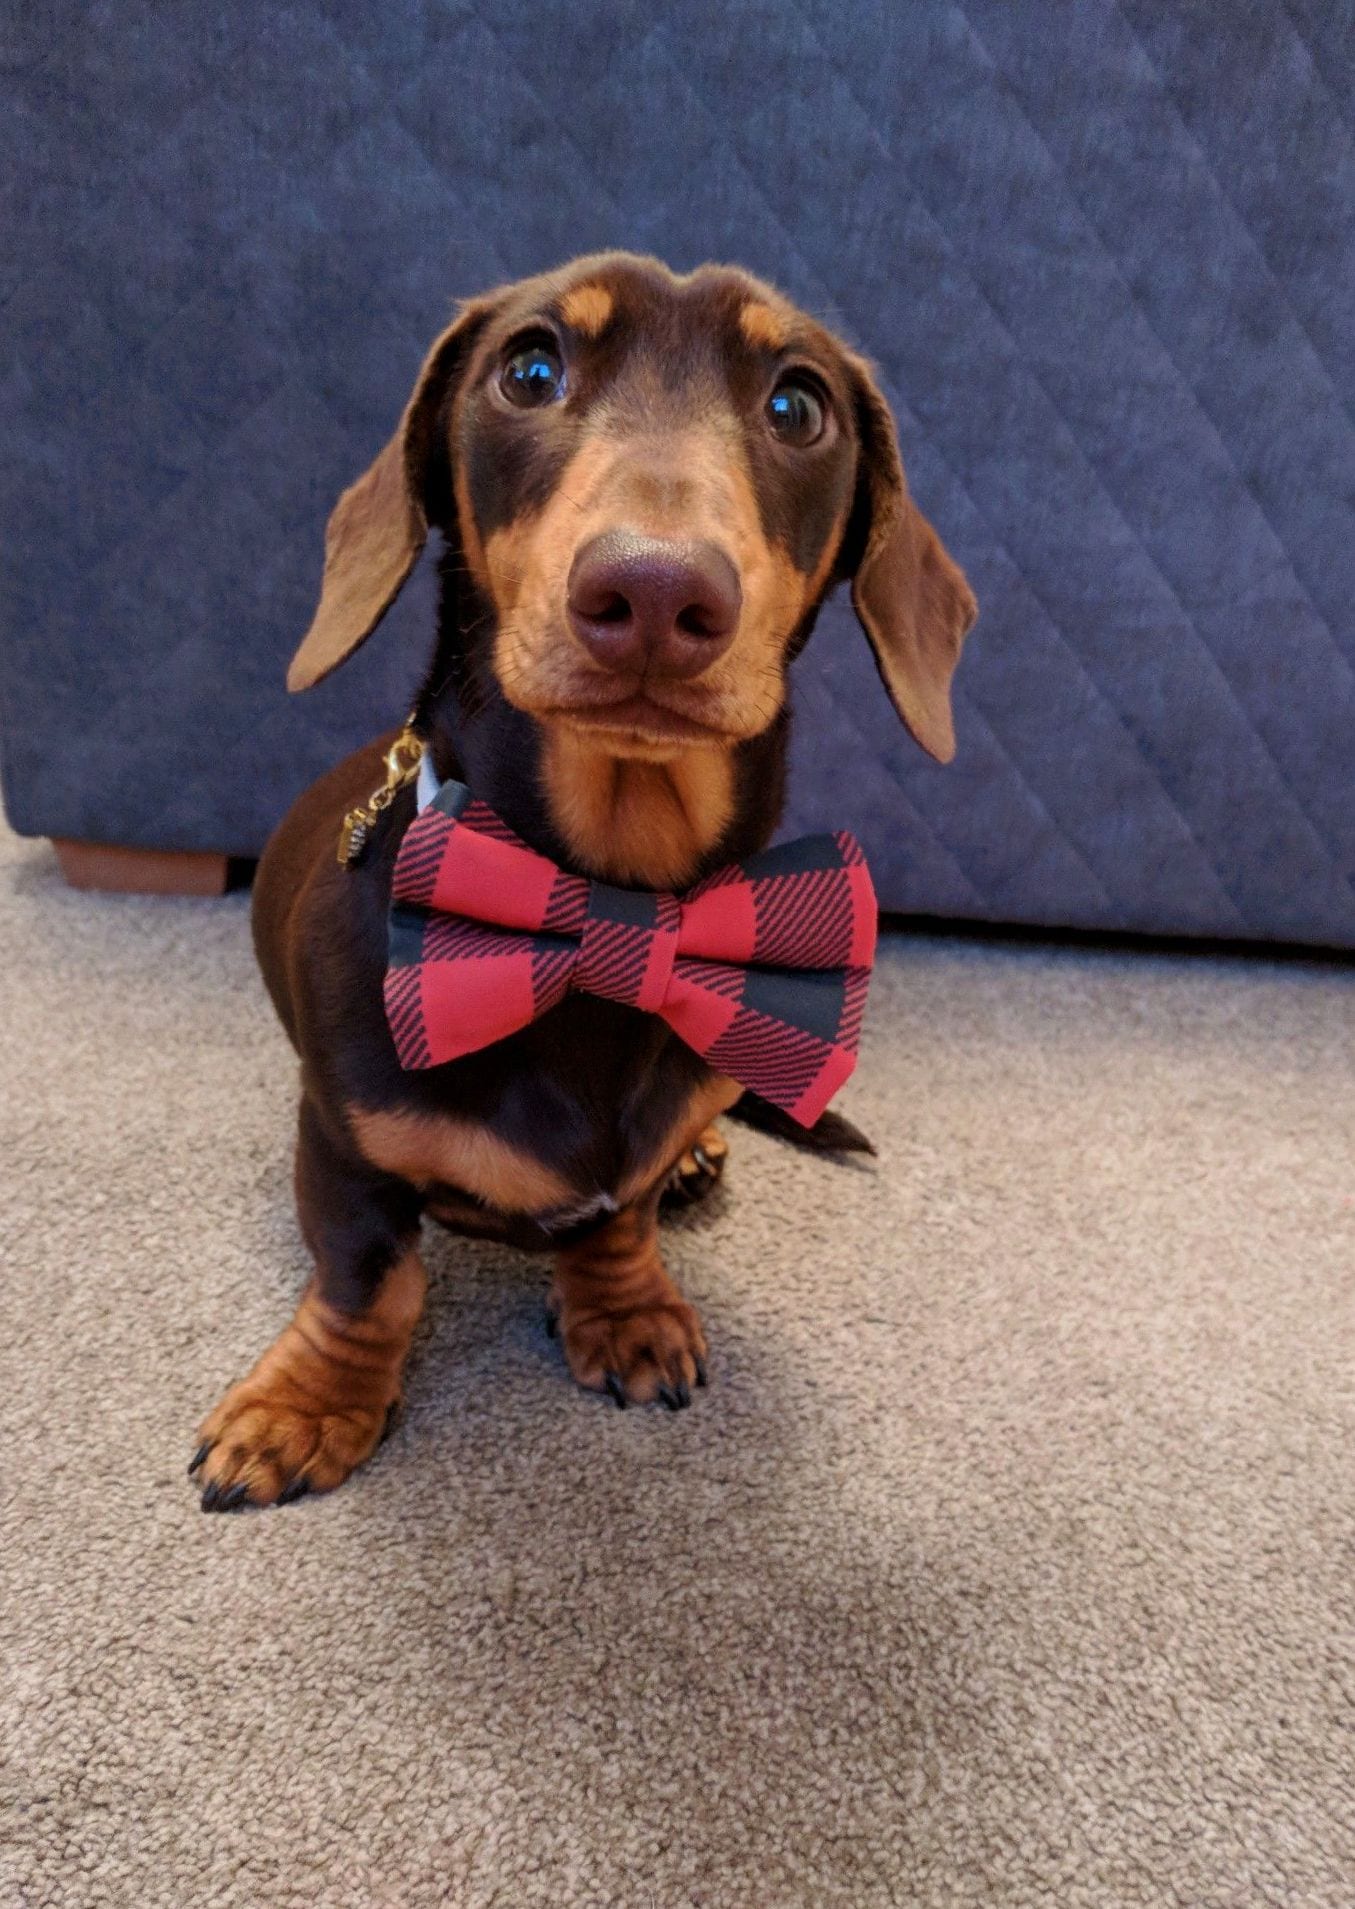 A Dachshund wearing a checkered red bow tie while sitting on the floor and looking up with its adorable eyes